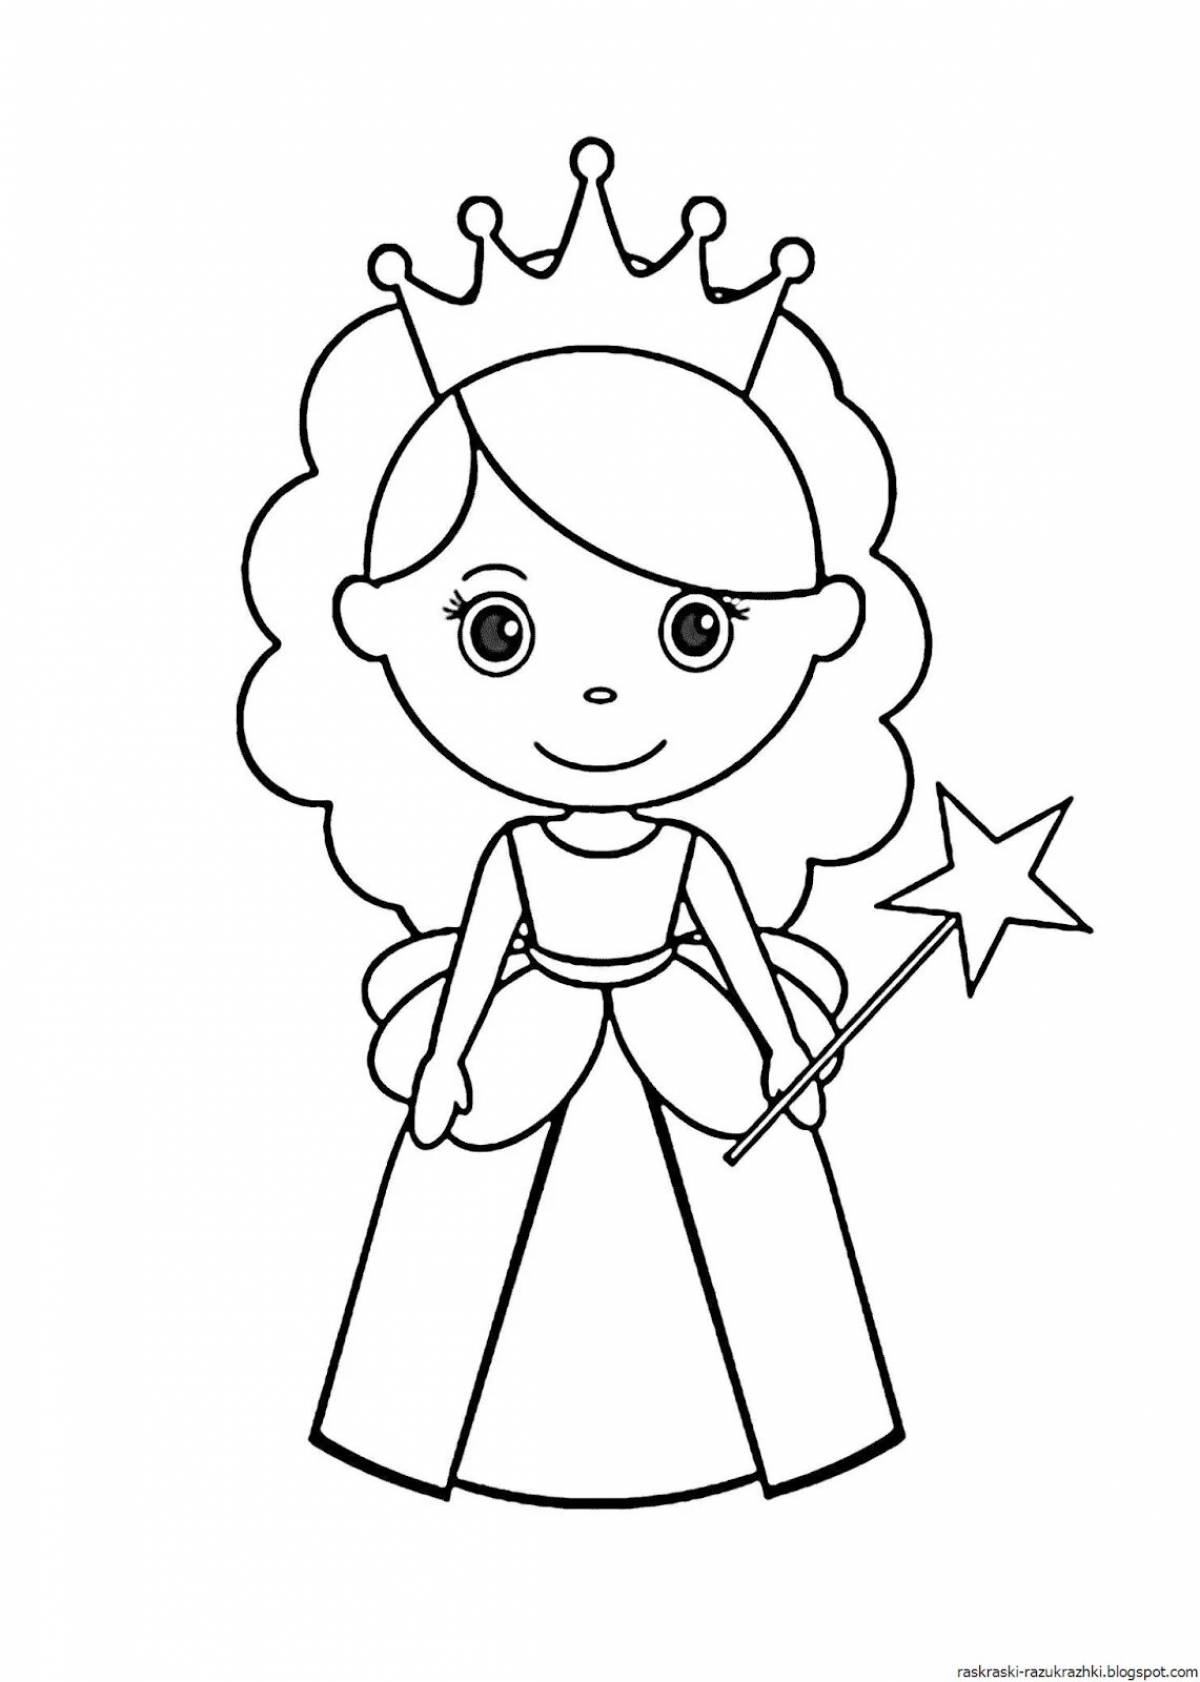 Glitter princess coloring pages for girls 4-5 years old